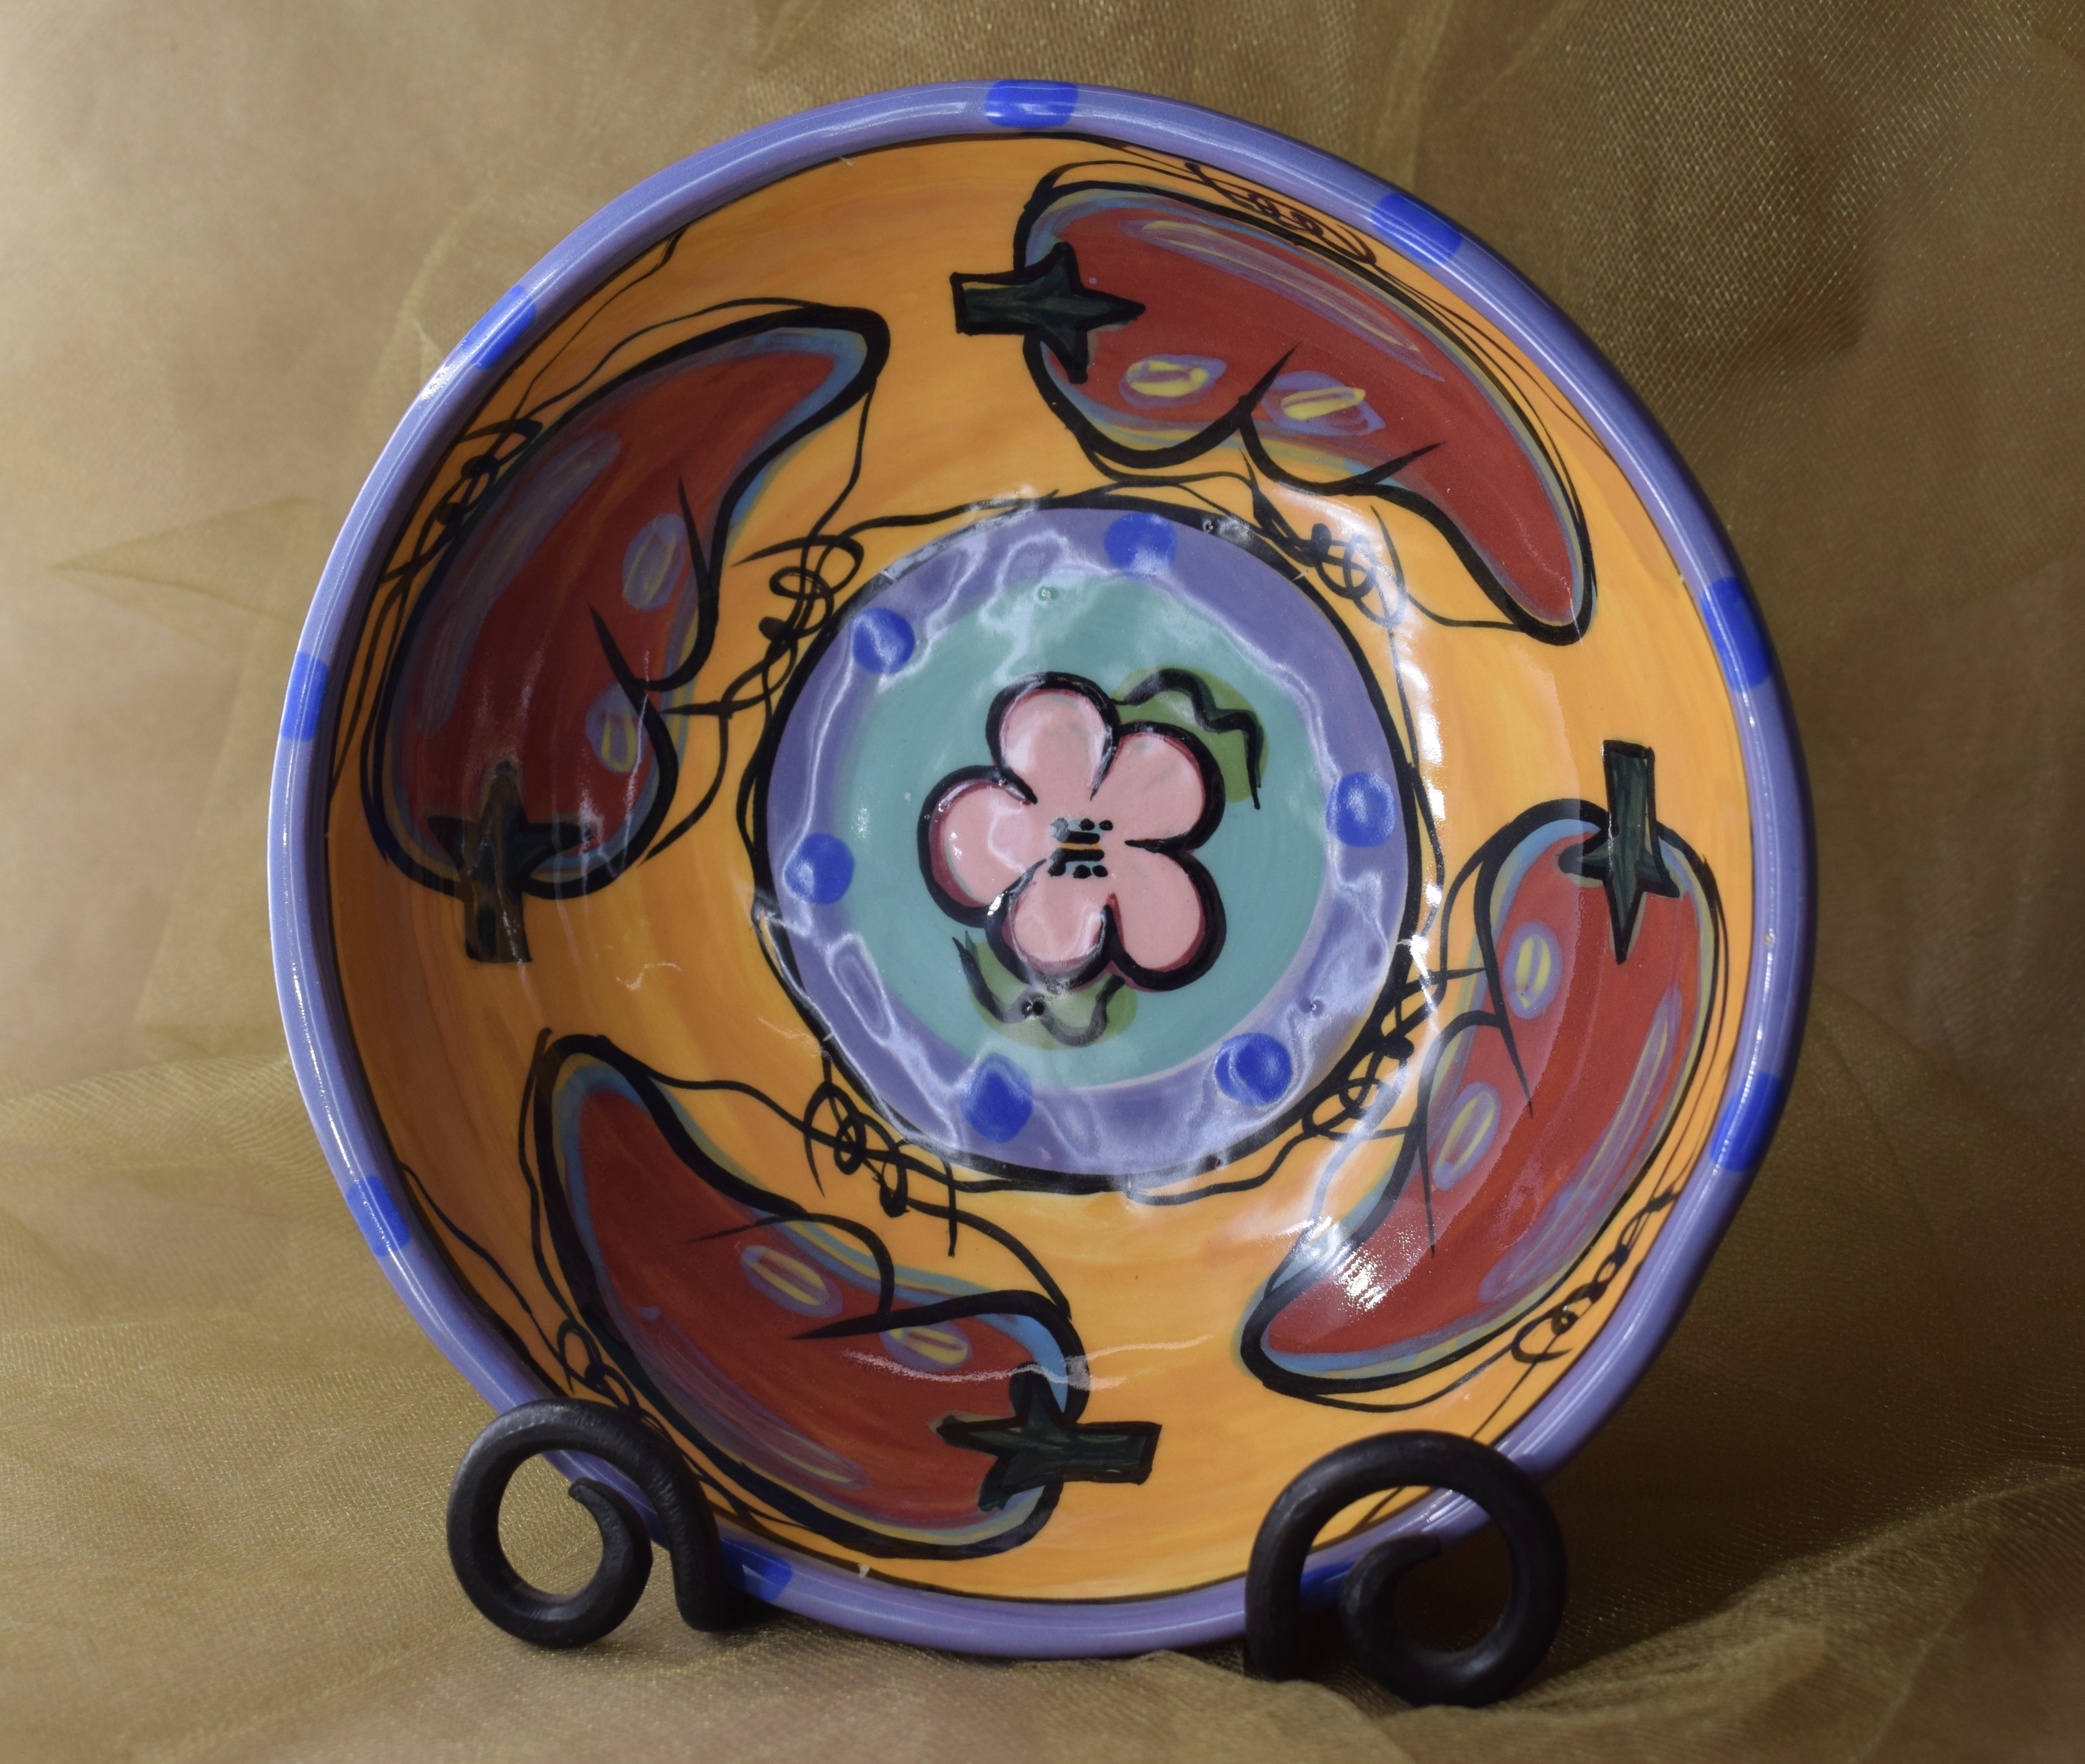 (CB11-CP)7" Cereal Bowl - Chile Pachanga 